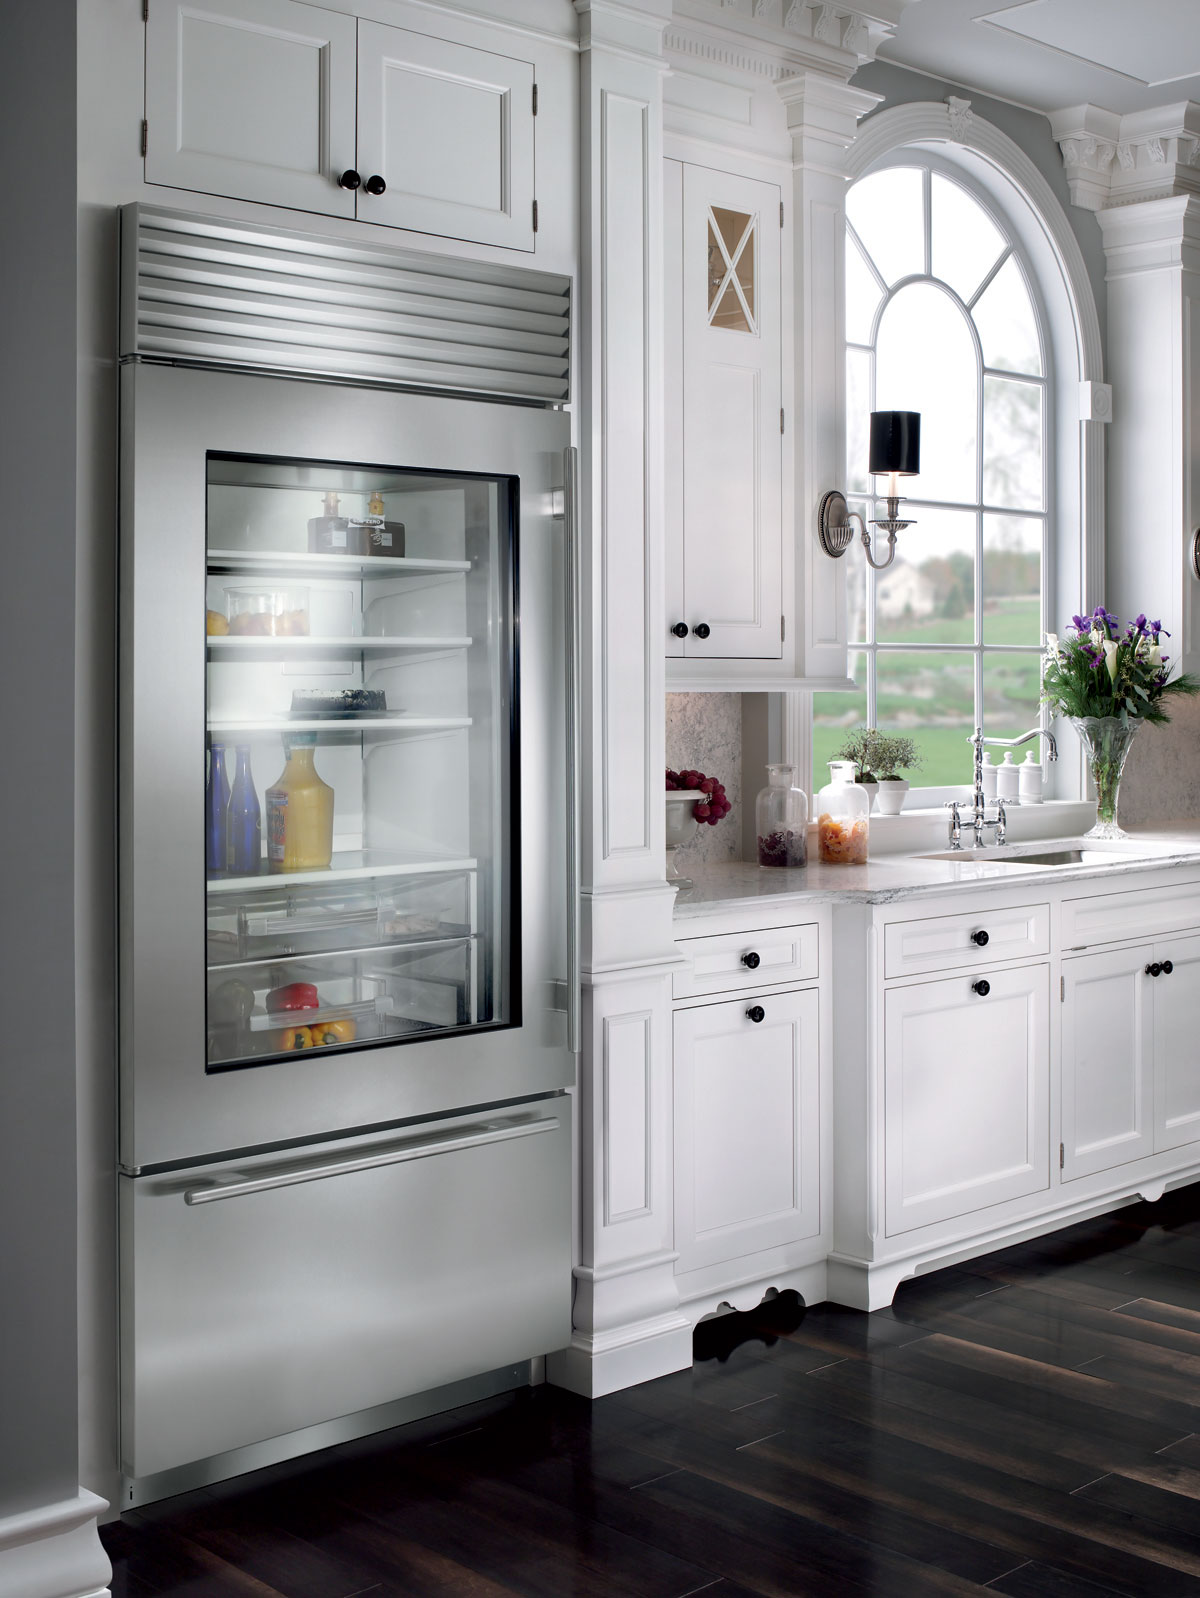 Kitchen Design White Traditional Kitchen Design Interior With White Kitchen Cabinet Made From Wooden Material Completed With Glass Door Refrigerator Design Decoration Glass Door Refrigerator As A Treasure Box For Your Hot Day